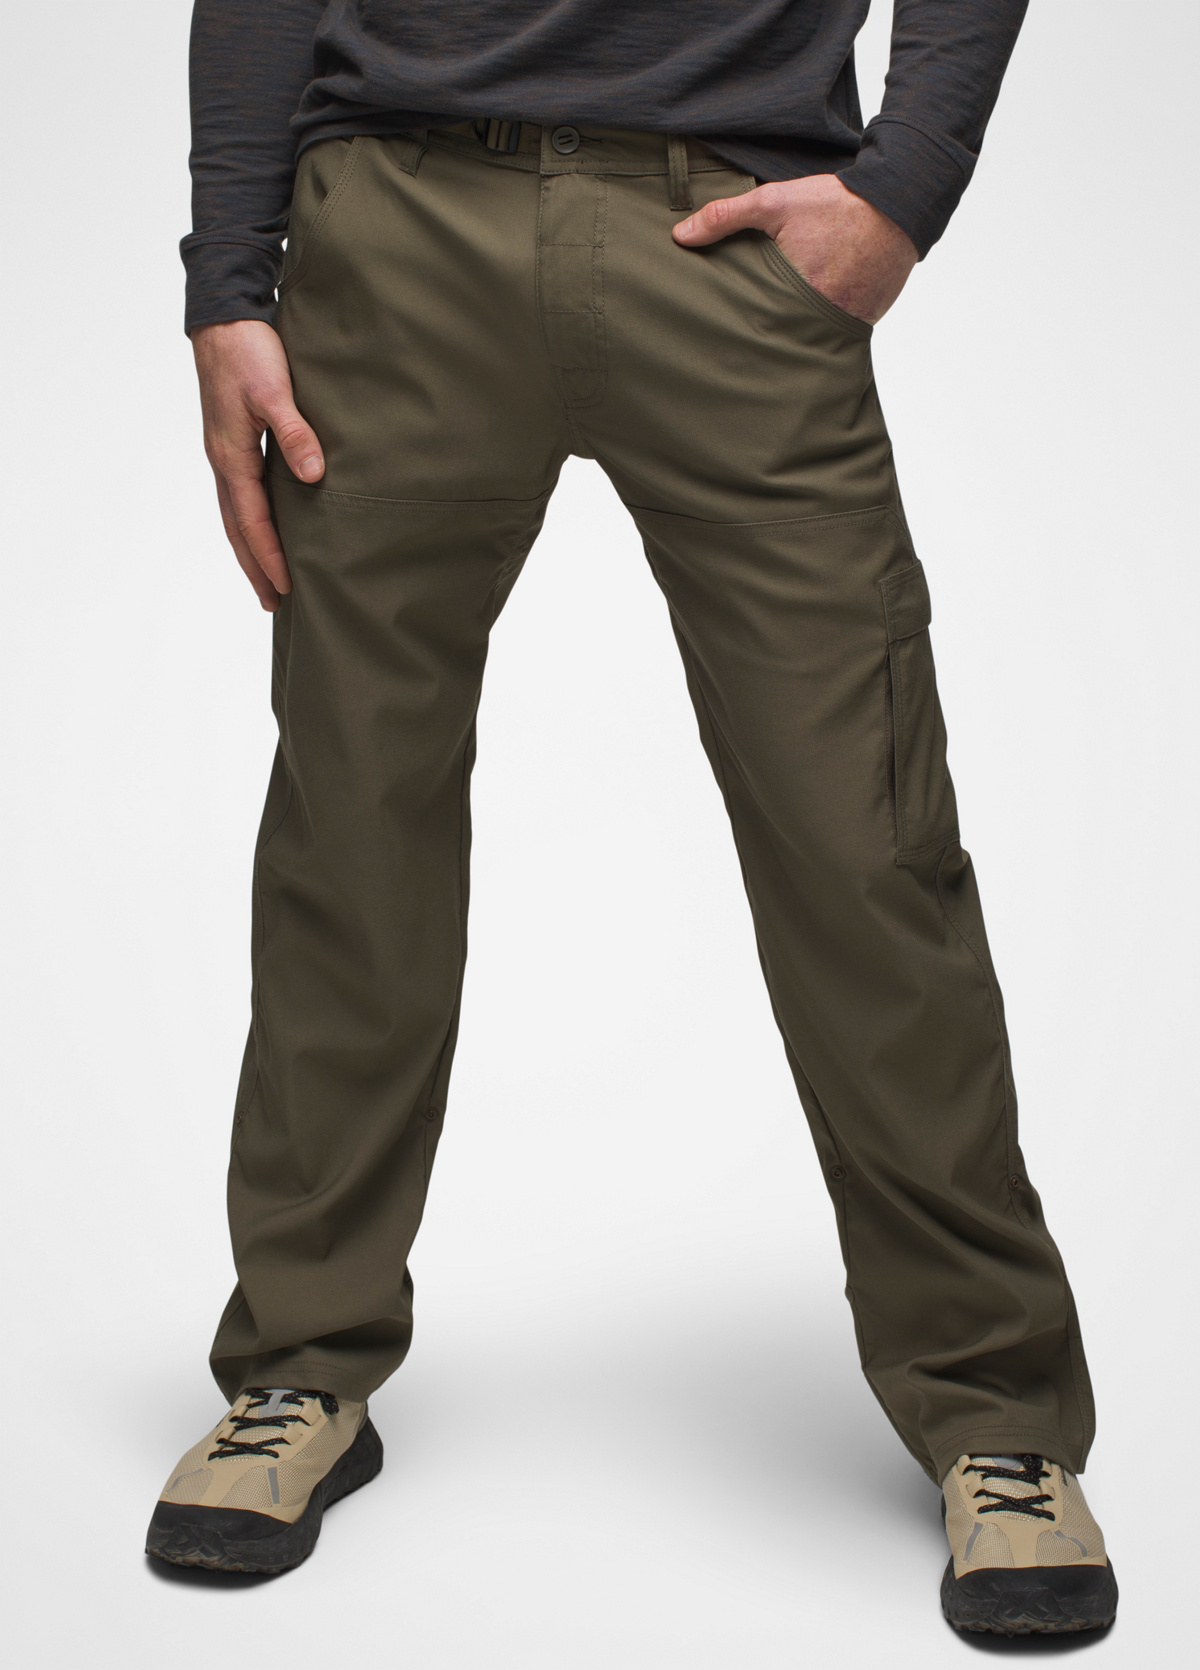 Men's Stretch Zion Pant - 34 Inseam - Gearhead Outfitters